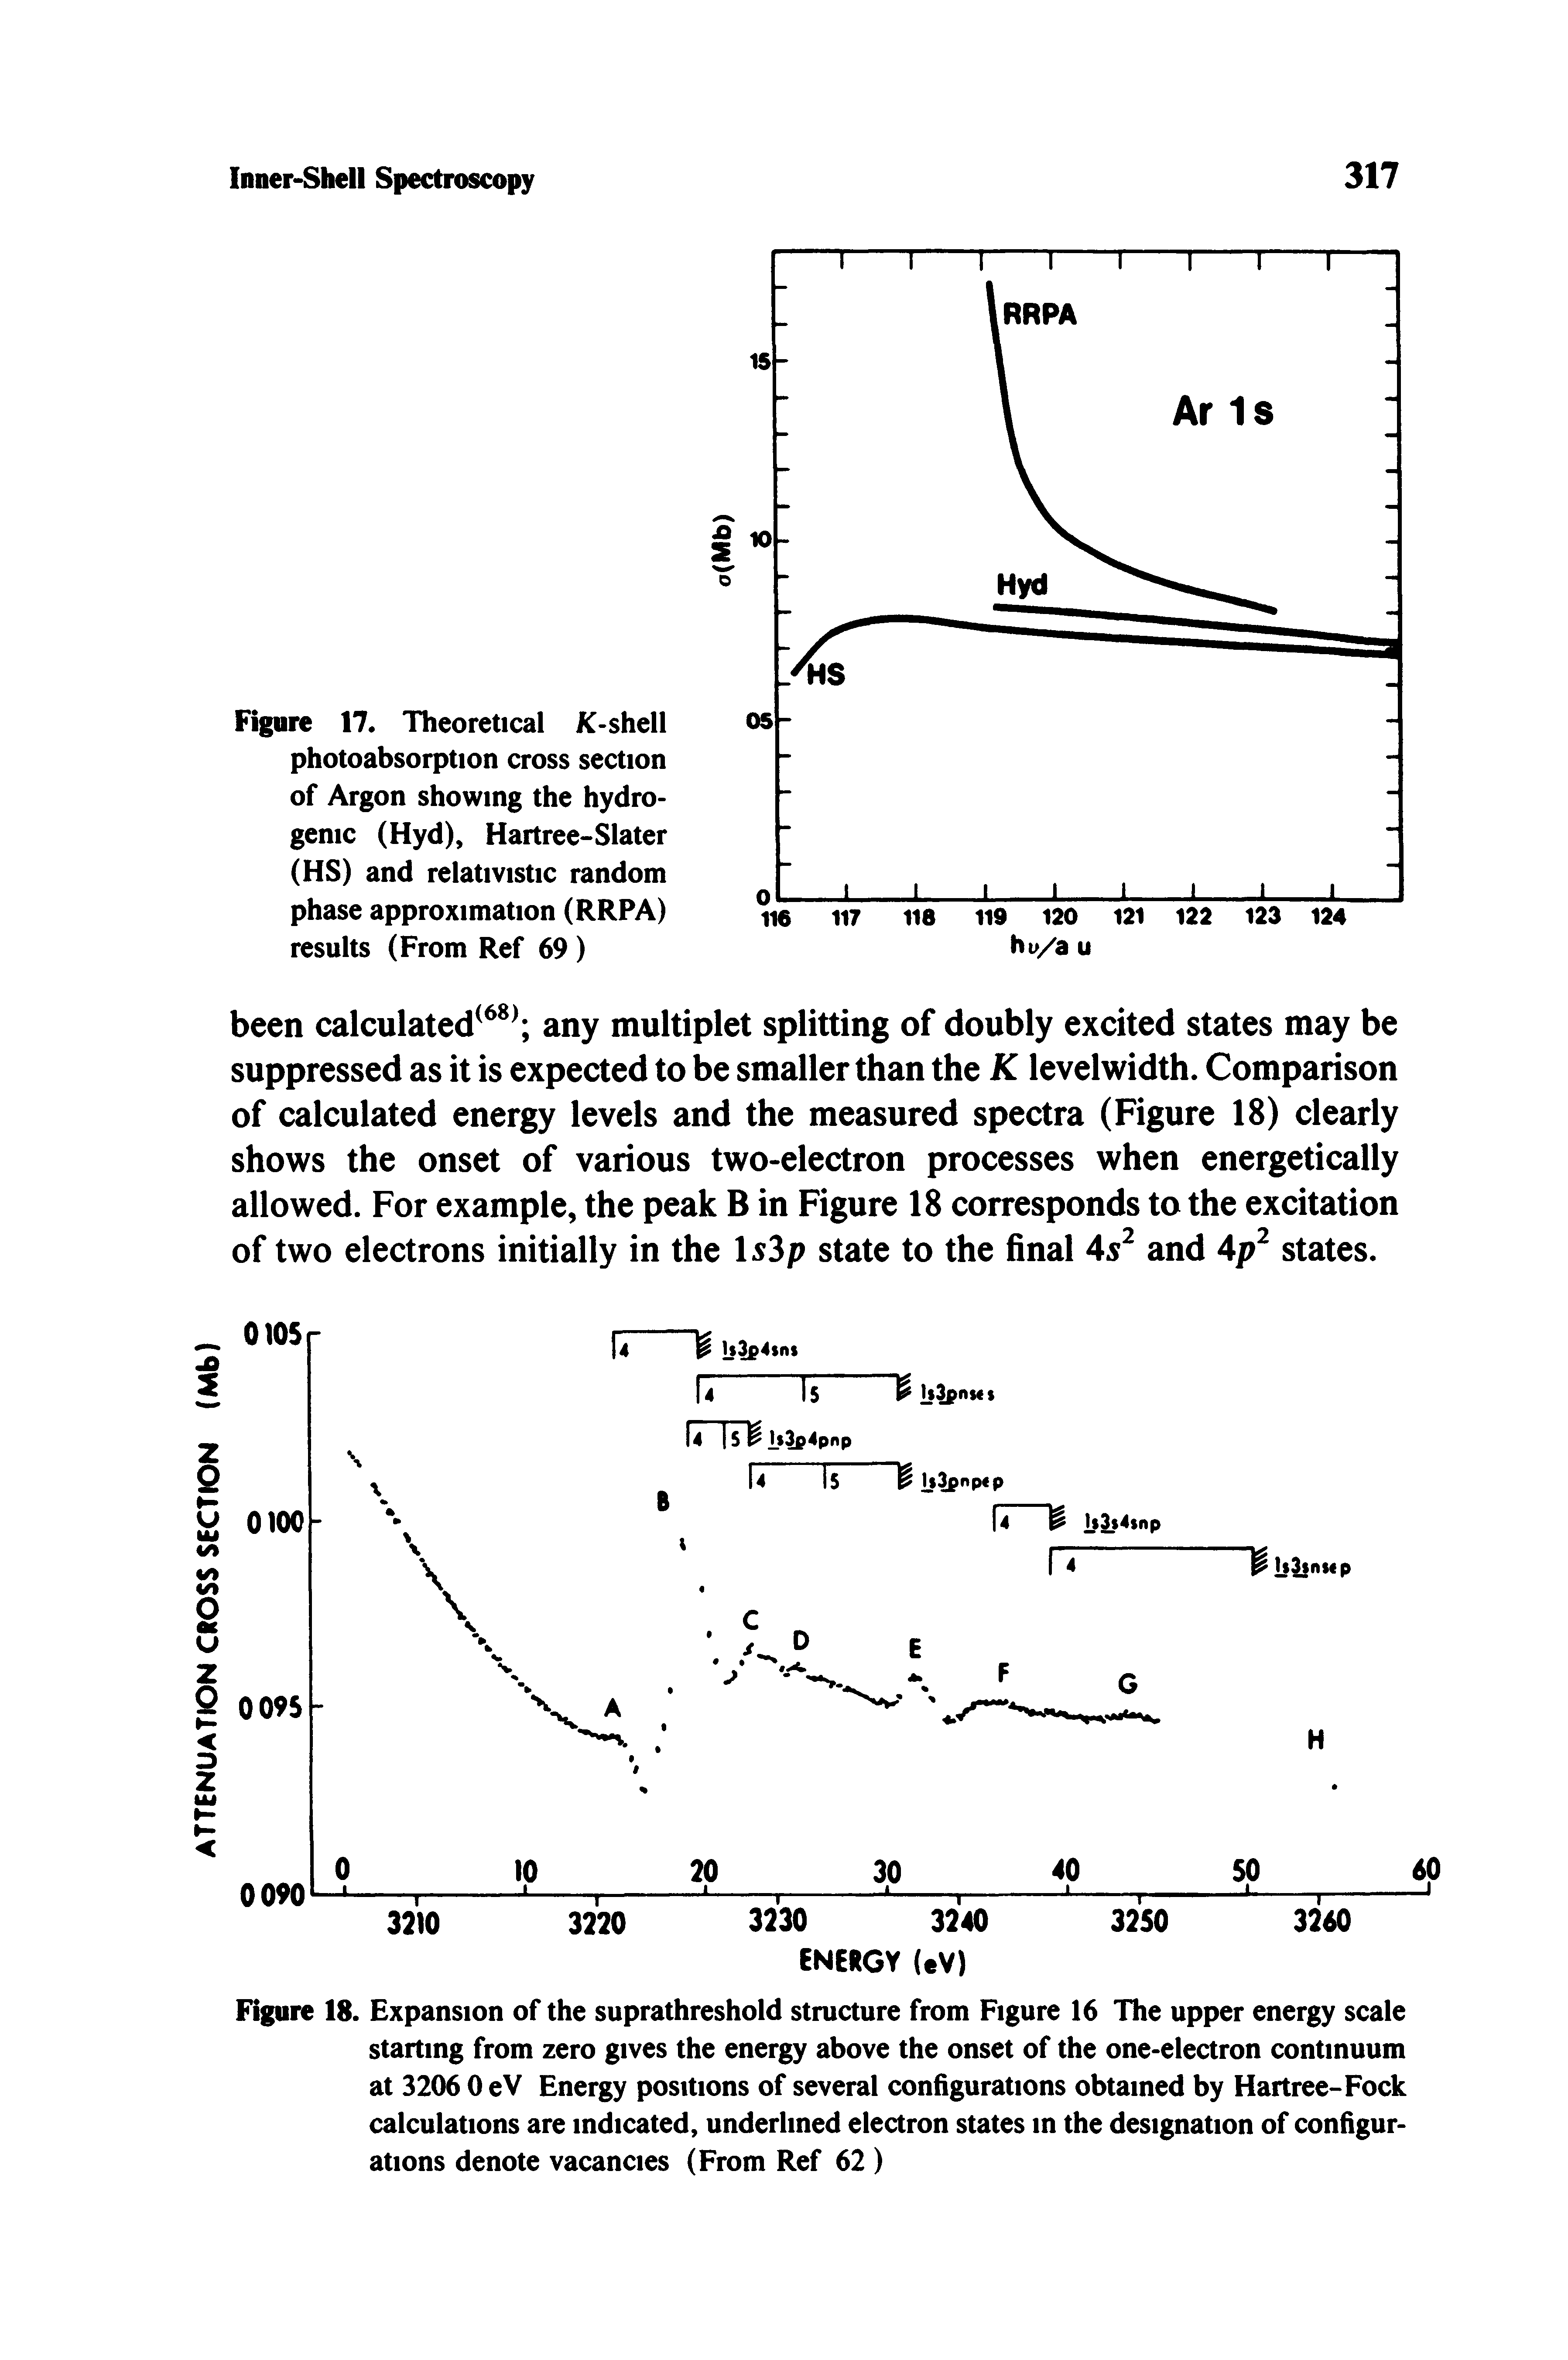 Figure 17. Theoretical K-shell photoabsorption cross section of Argon showing the hydro-genic (Hyd), Hartree-Slater (HS) and relativistic random phase approximation (RRPA) results (From Ref 69 )...